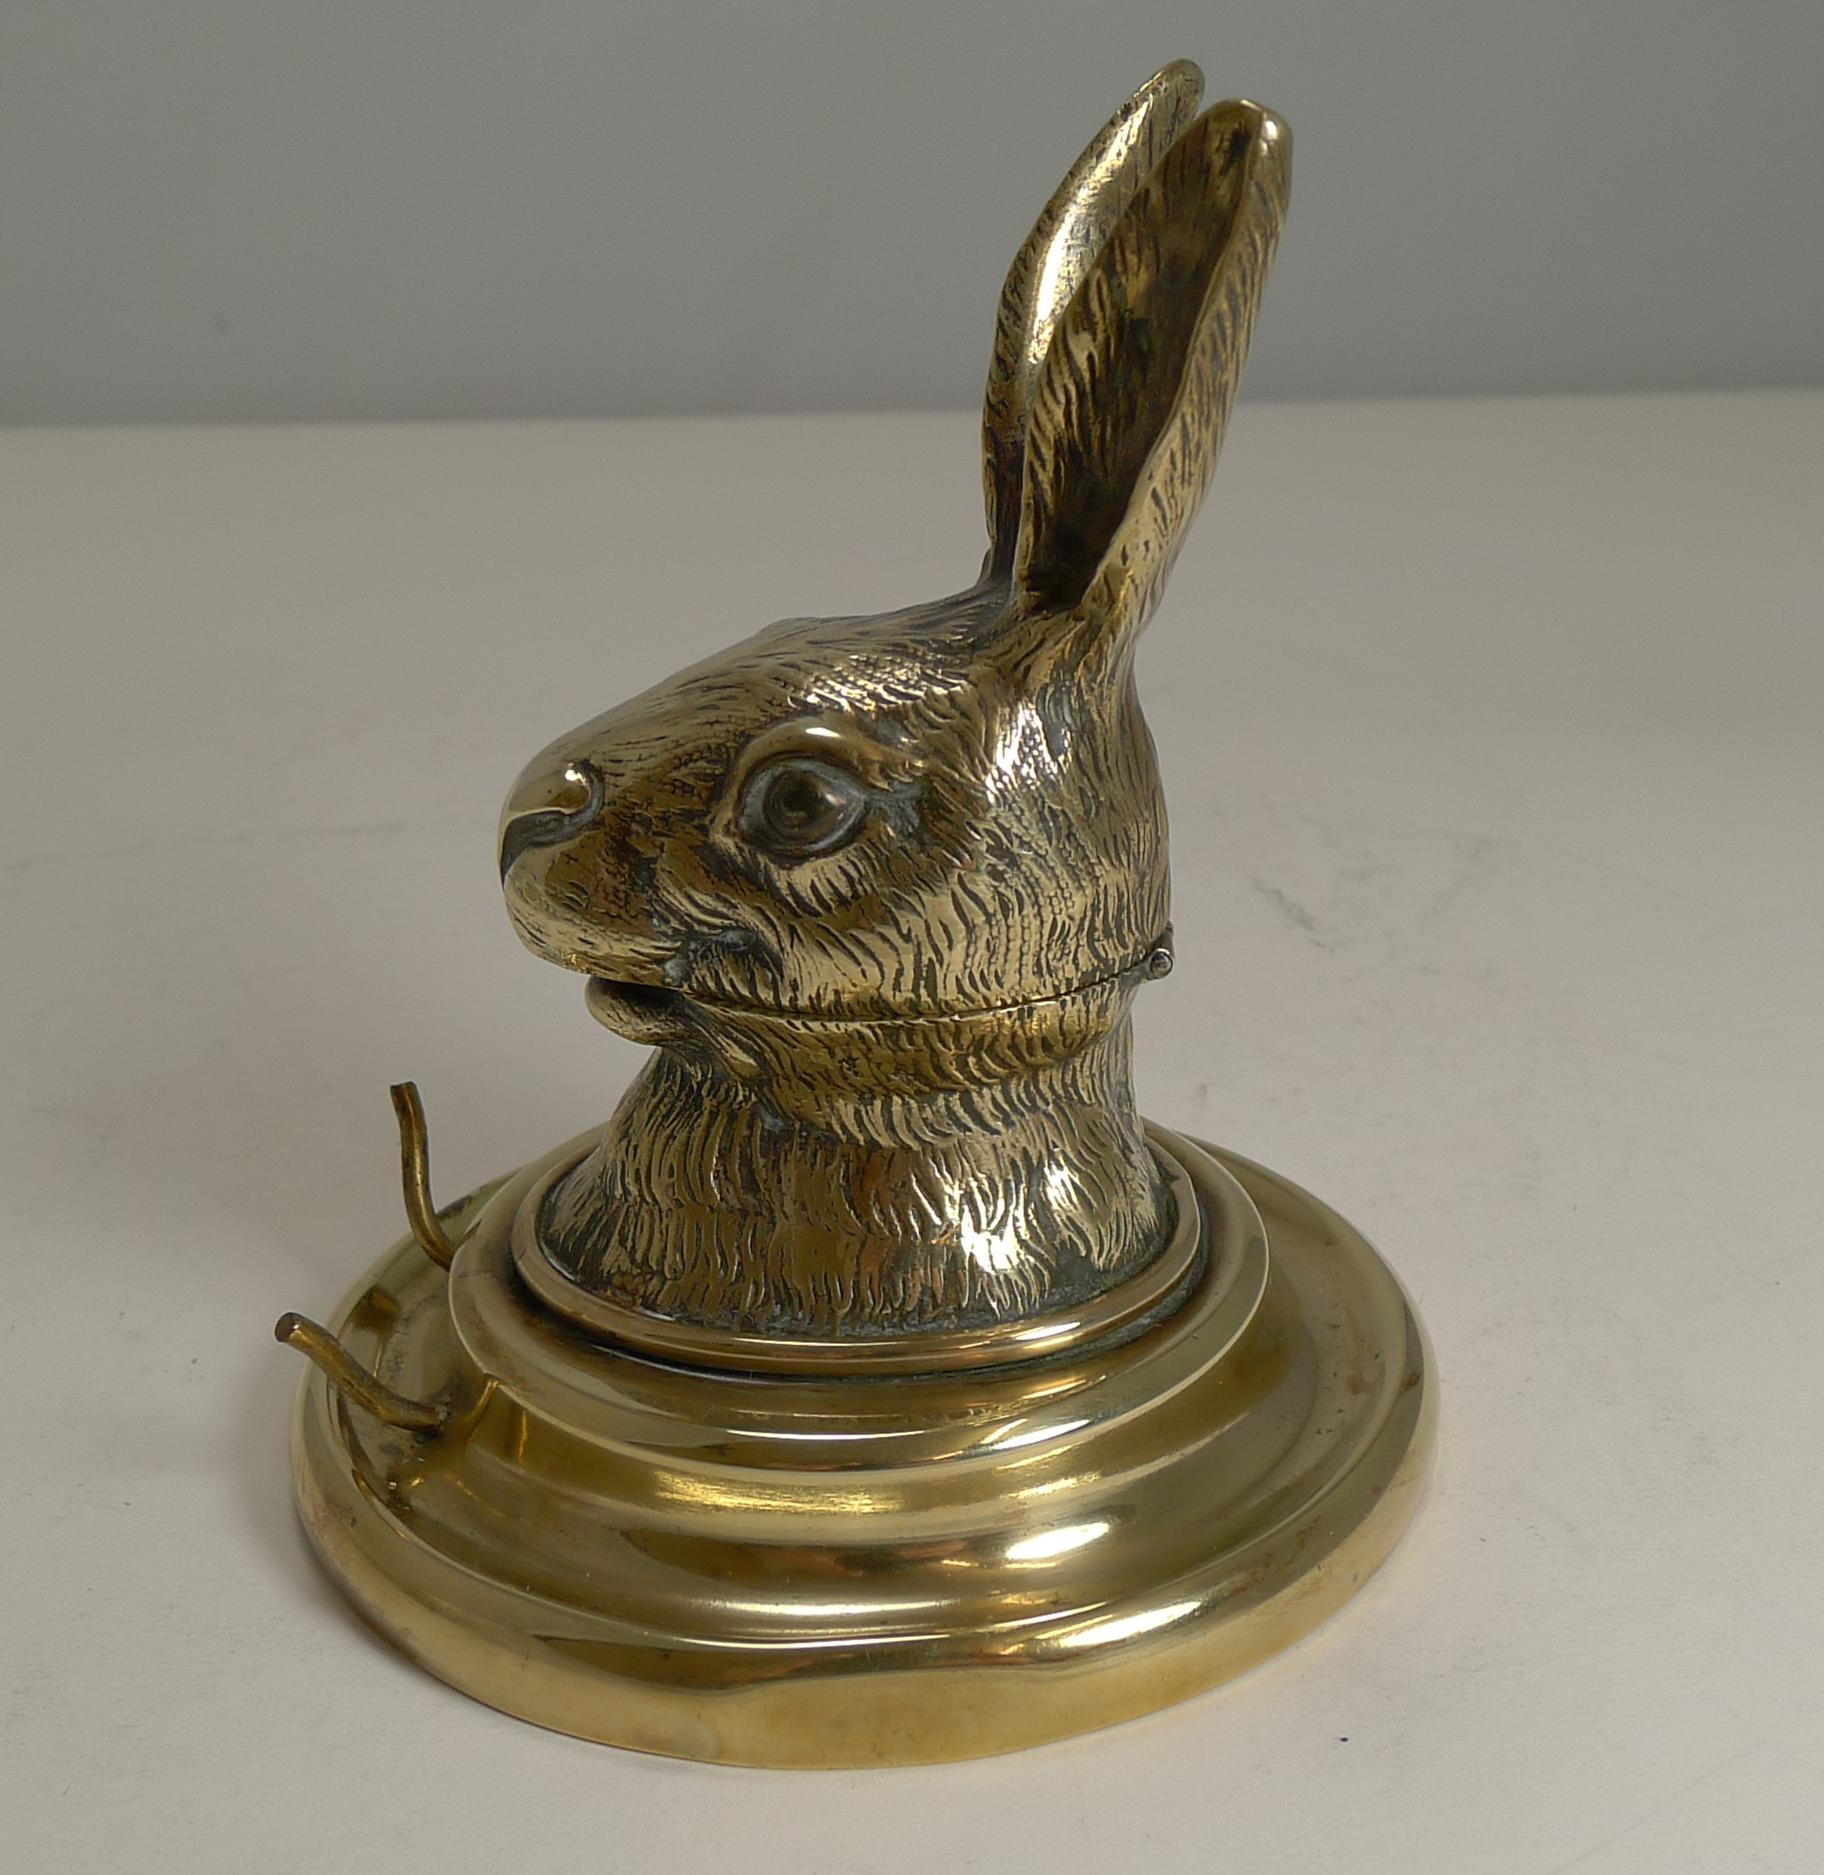 Late Victorian Antique English Novelty / Figural Brass Inkwell - Hare c.1880 For Sale